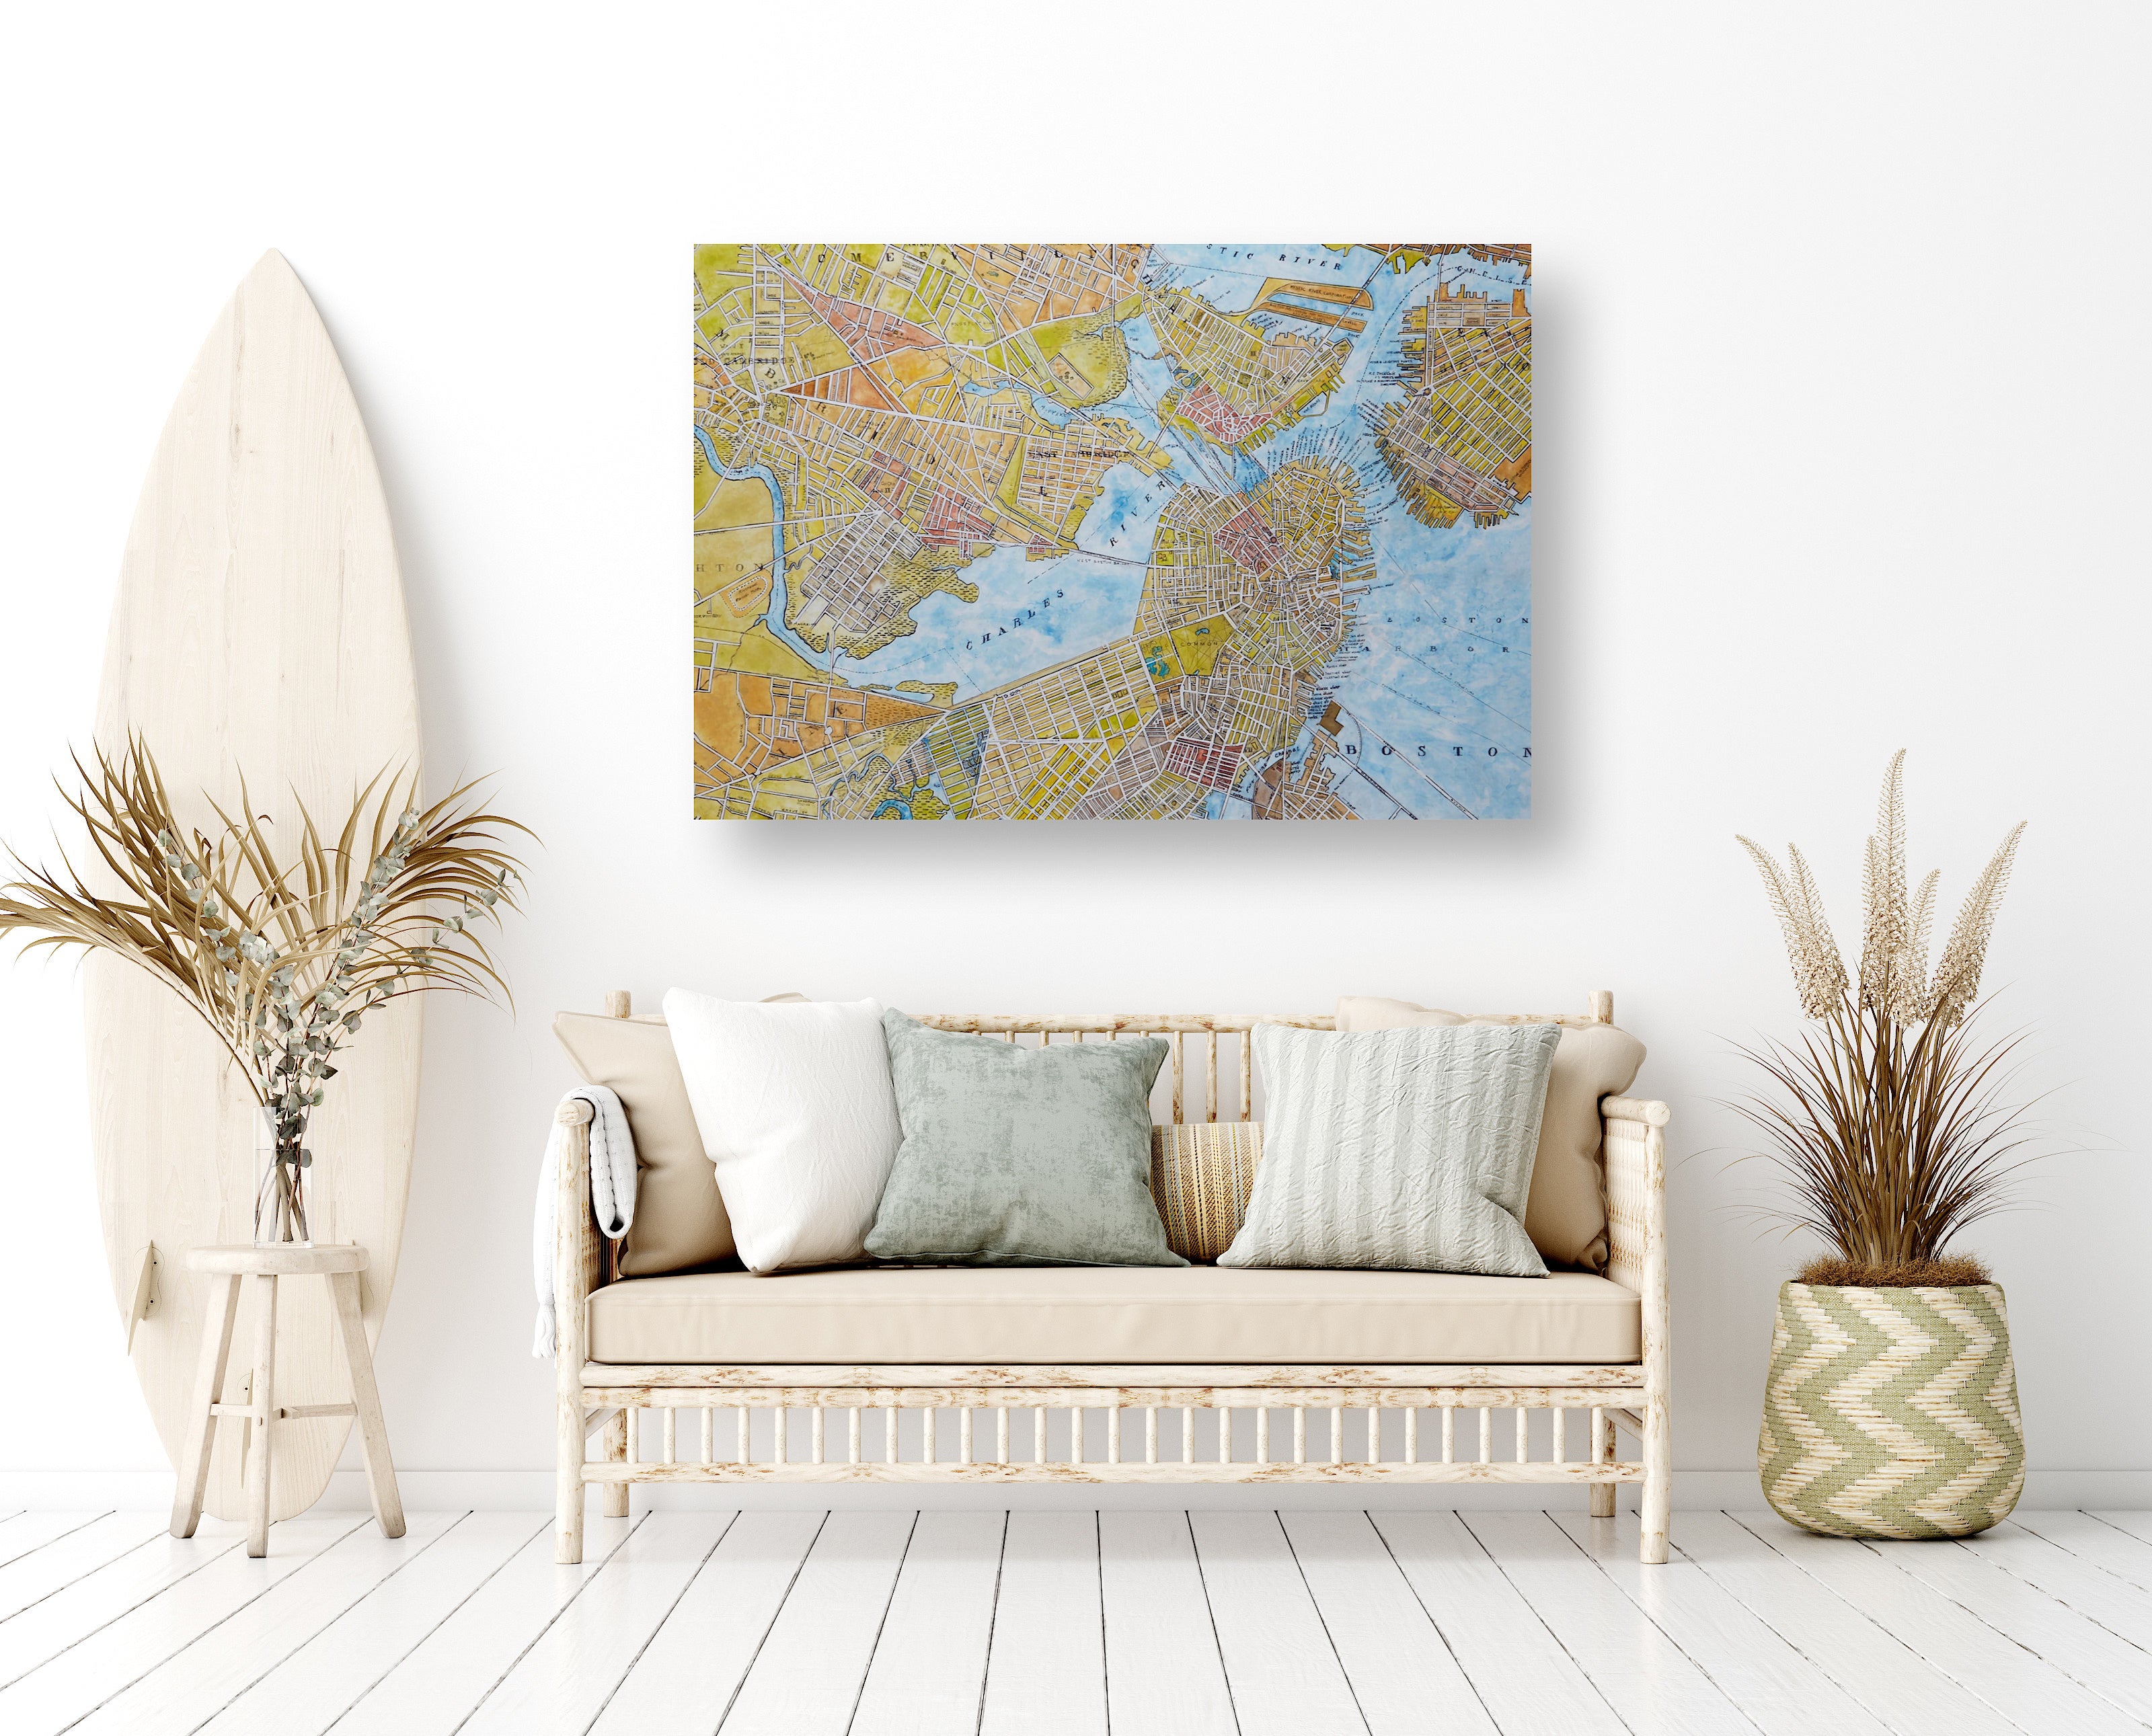 This scene shows an oil on canvas original painting entitled 'Boston Map' by seth b minkin